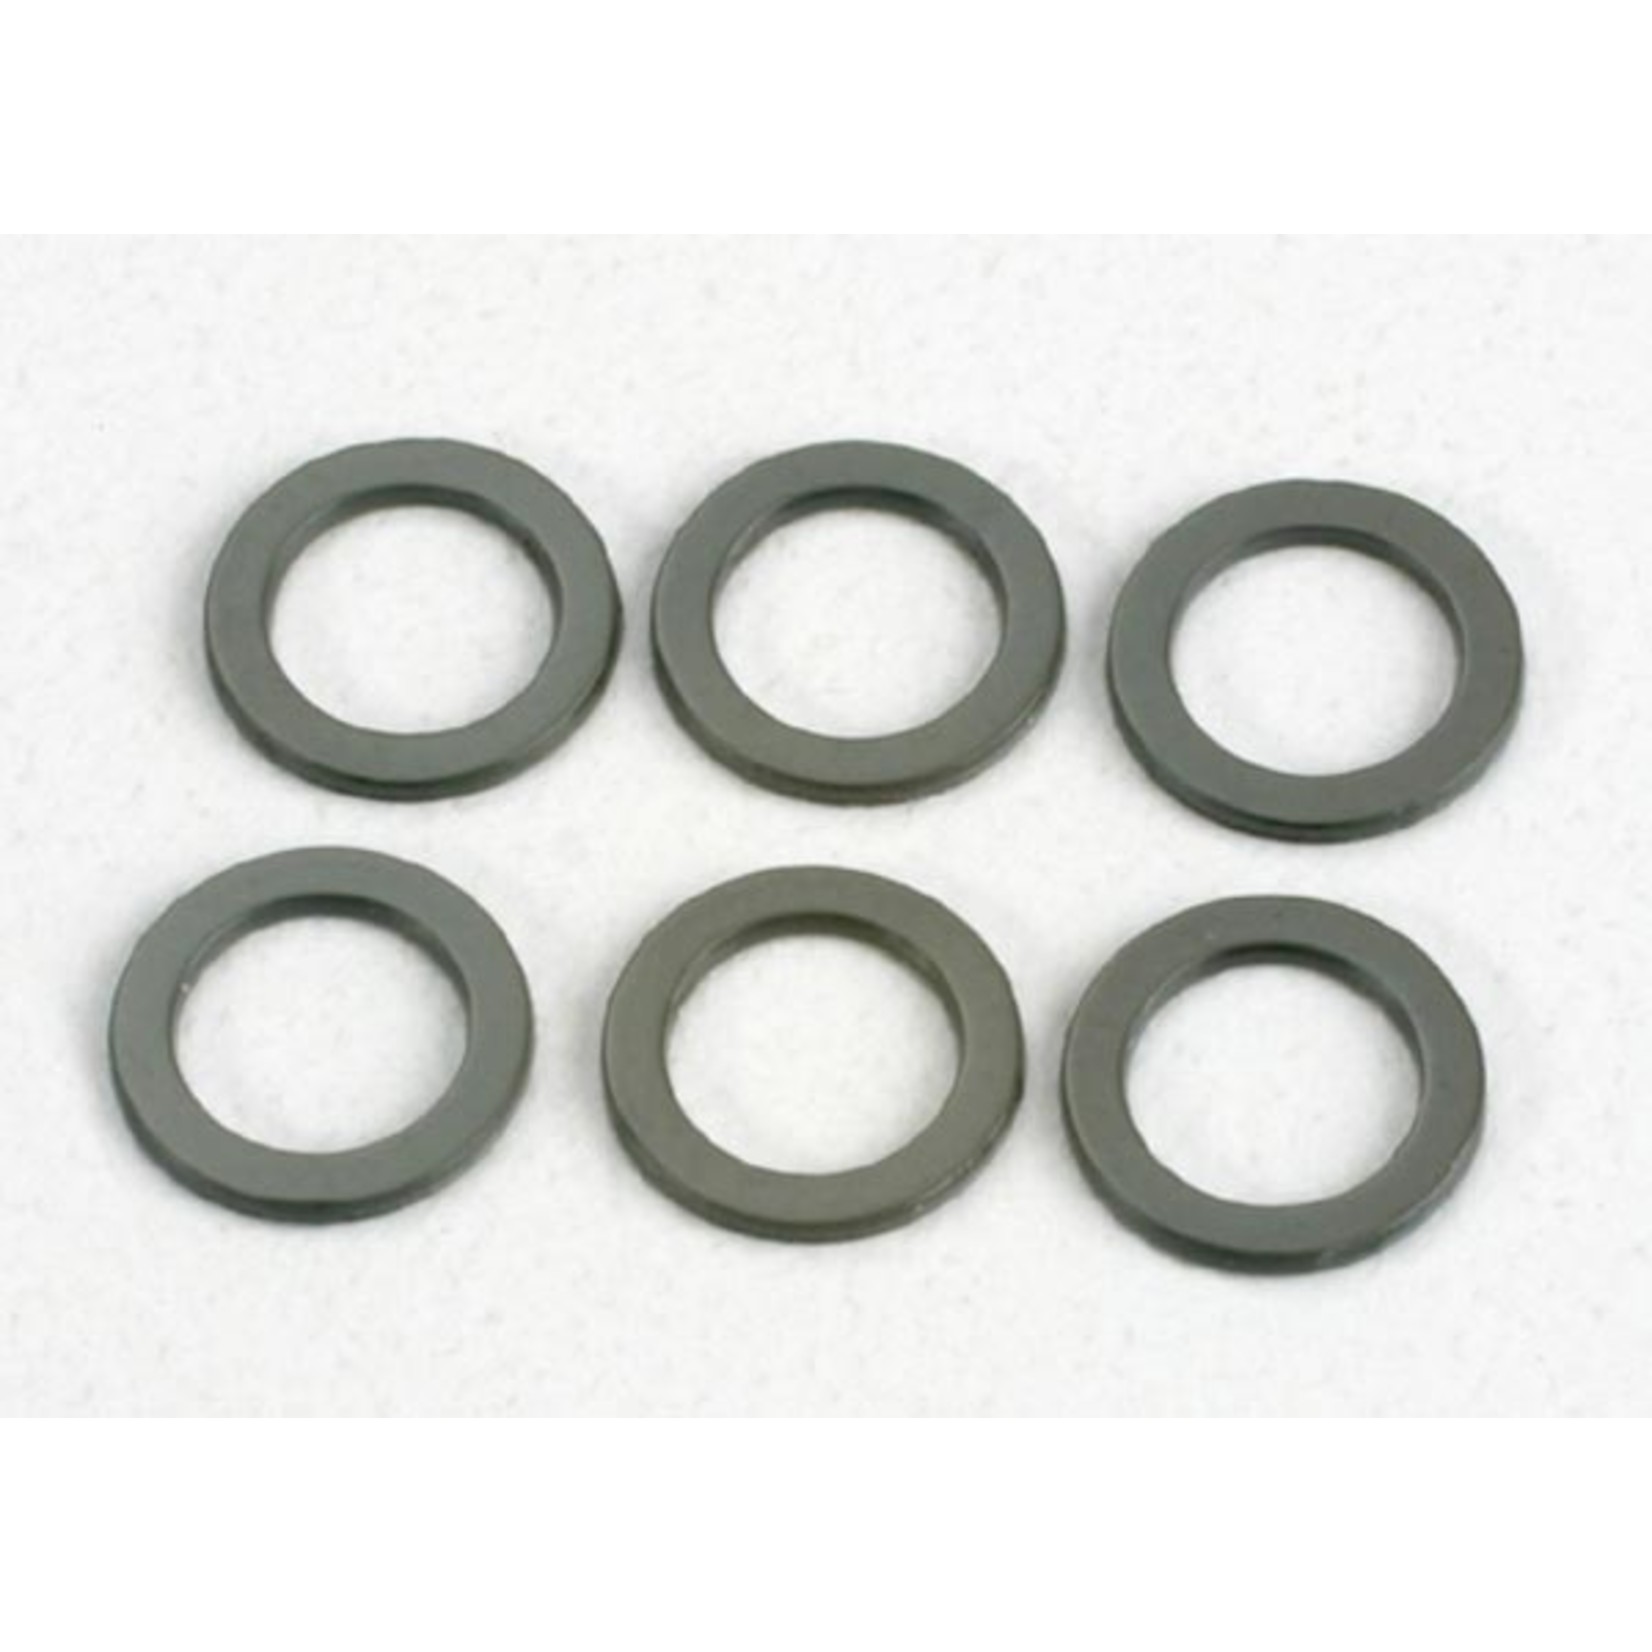 Traxxas 1549 - Washers, PTFE-coated 4x6x0.5mm